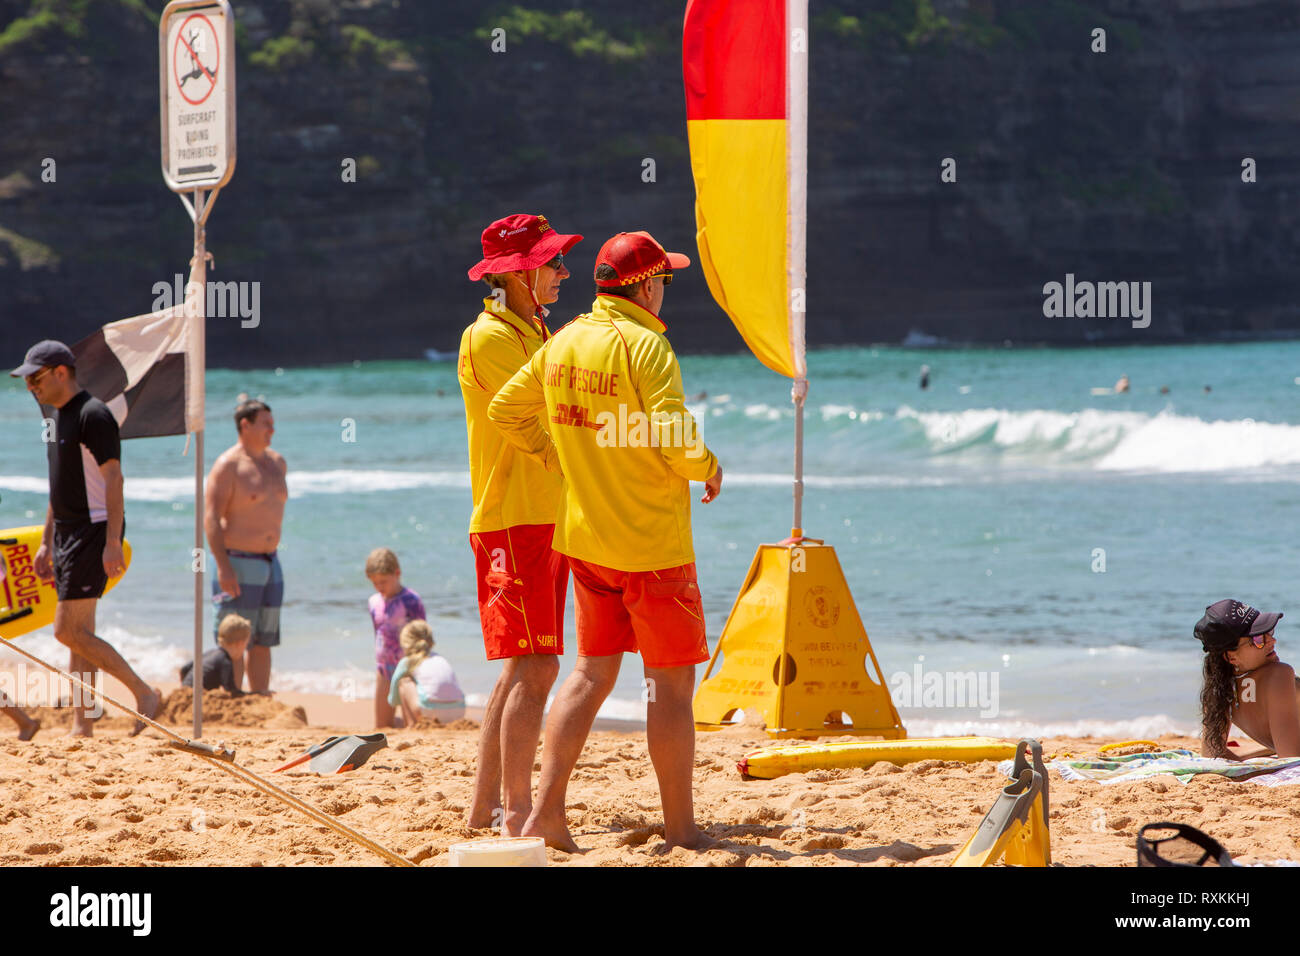 Volunteer surf rescue personnel stood by yellow and red flags on Bilgola beach,Sydney,Australia Stock Photo